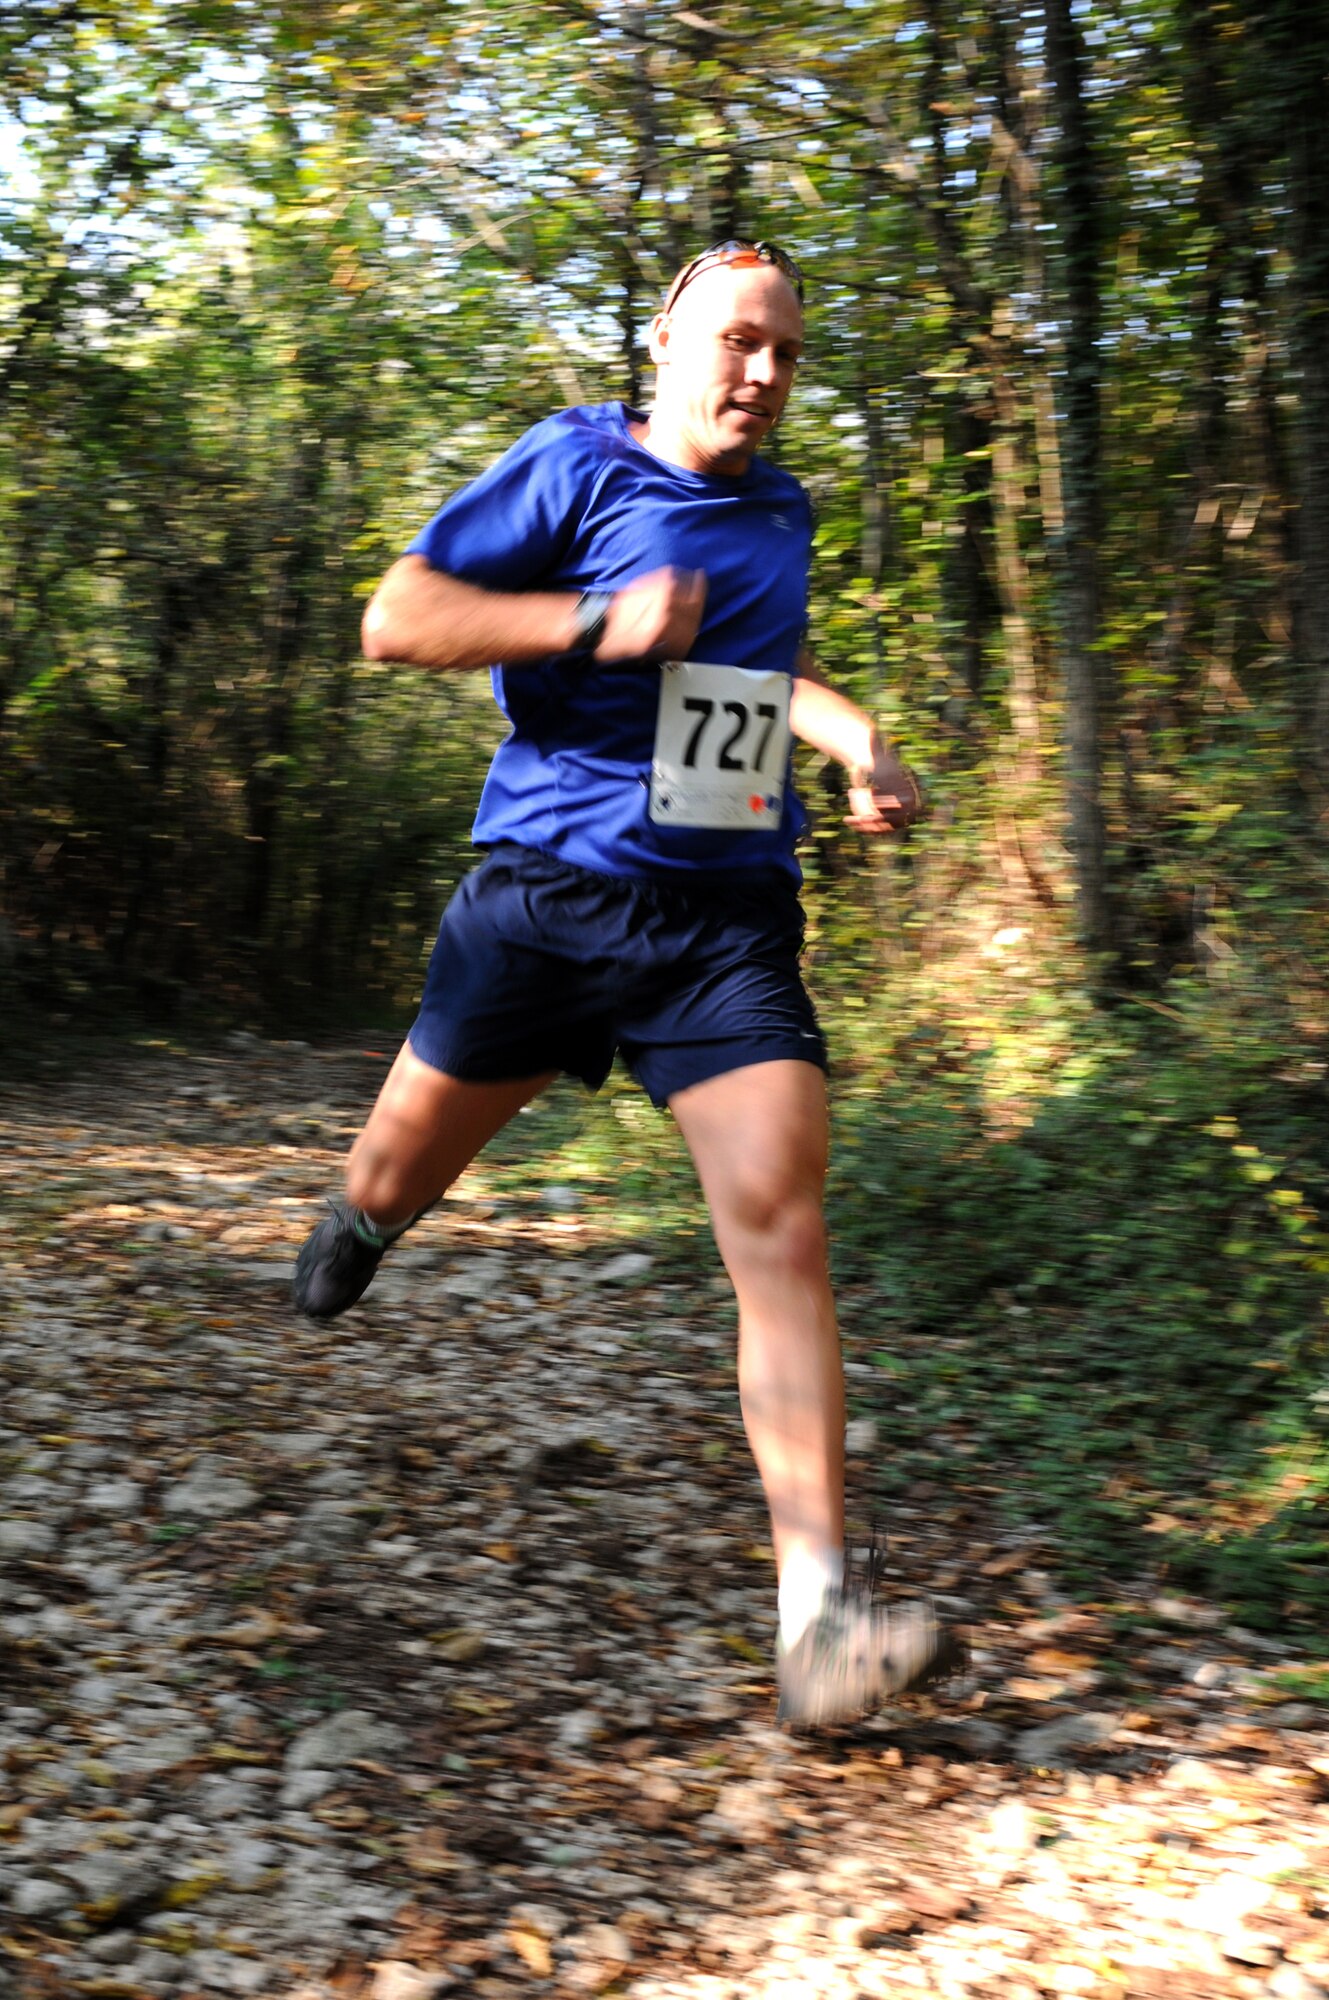 Eric Fitzpatrick, 724th Air Mobility Squadron, runs the 10 km course during the 2010 U.S. Air Forces in Europe Cross-Country Central Region Championships Oct. 15 at Madonna Del Monte, Aviano, Italy. Fitzpatrick took first place in men's 10 km race in the 30 to 39 age group. (U.S. Air Force photo/Staff Sgt. Julius Delos Reyes)